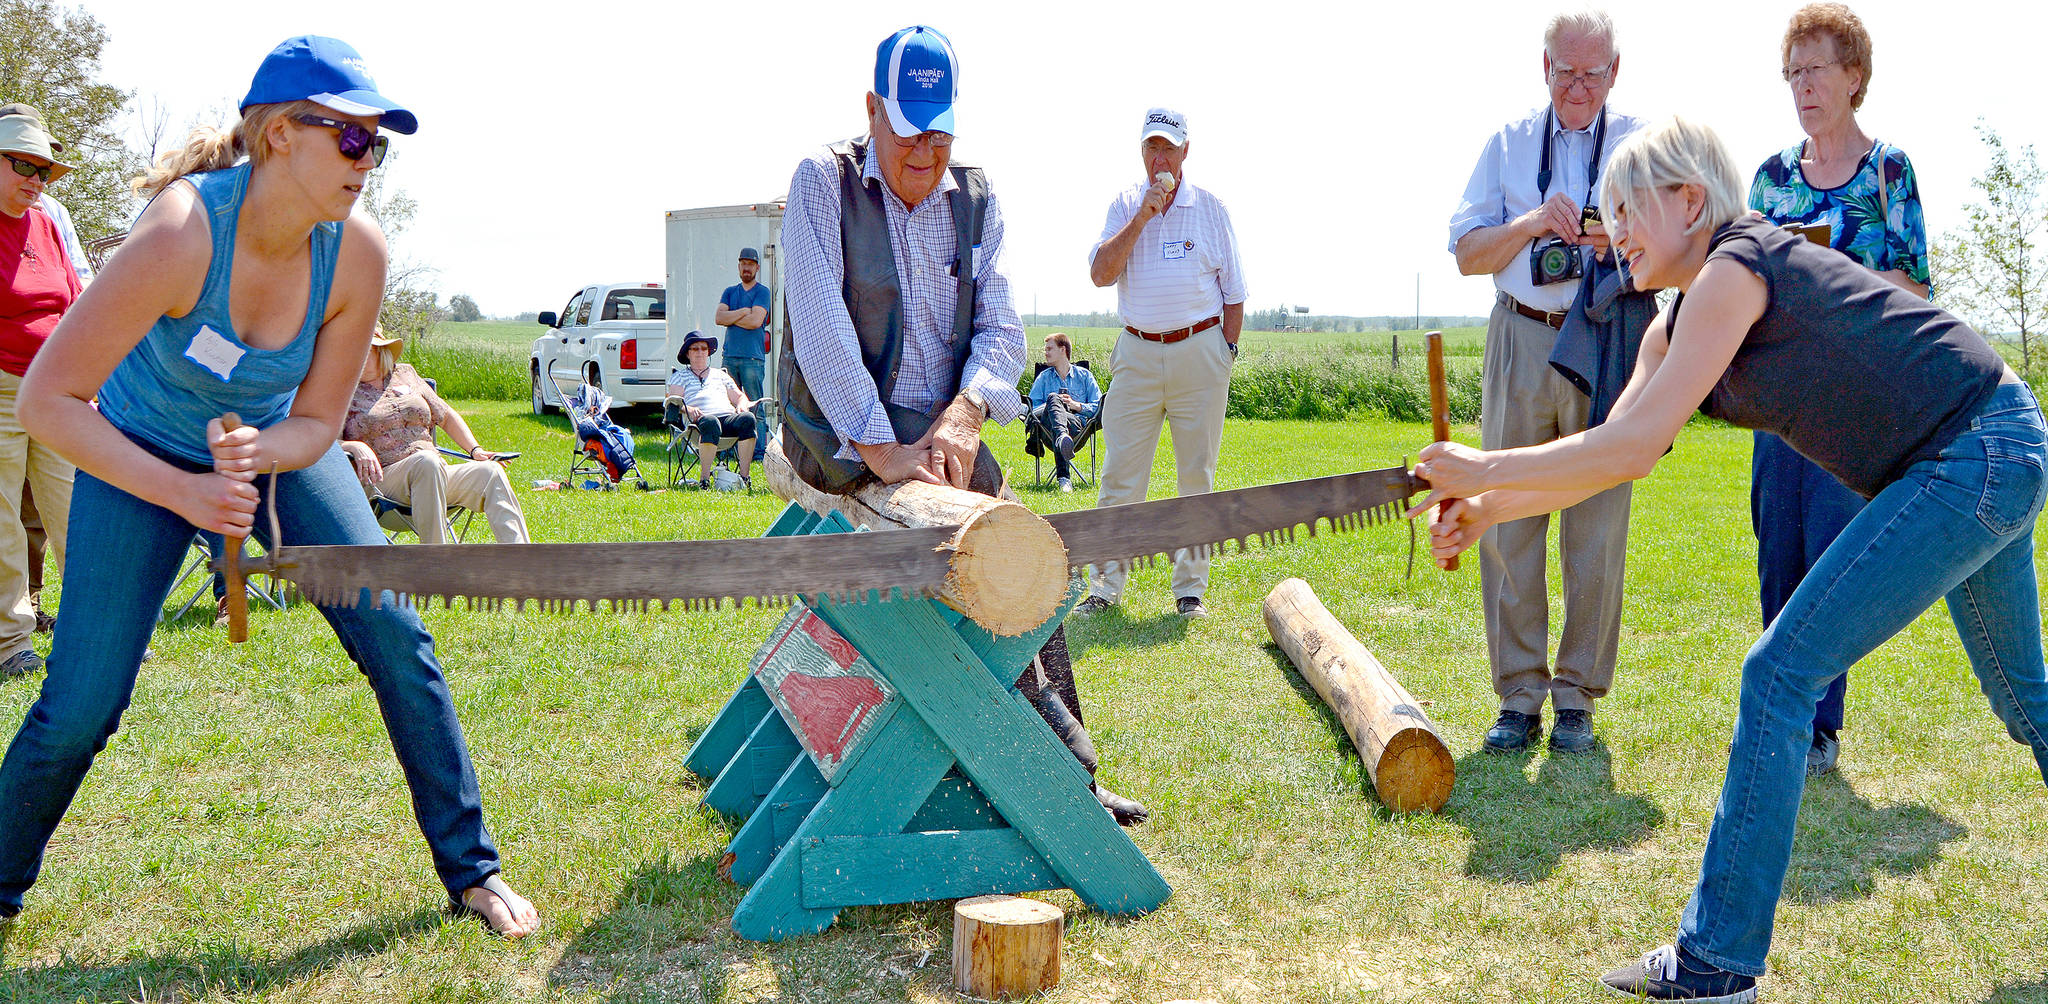 Liisa Tipman, right, and Aili Kuutan participate in the pioneer game of log sawing during the Estonia Celebration in Stettler County June 23. Liisa lives in Calgary and her family still resides in Big Valley. Aili lives in Toronto and her family still resides in Big Valley. Liisa and Aili are cousins and descendants of the Tipman pioneer family. (Lisa Joy/Black Press News Services)